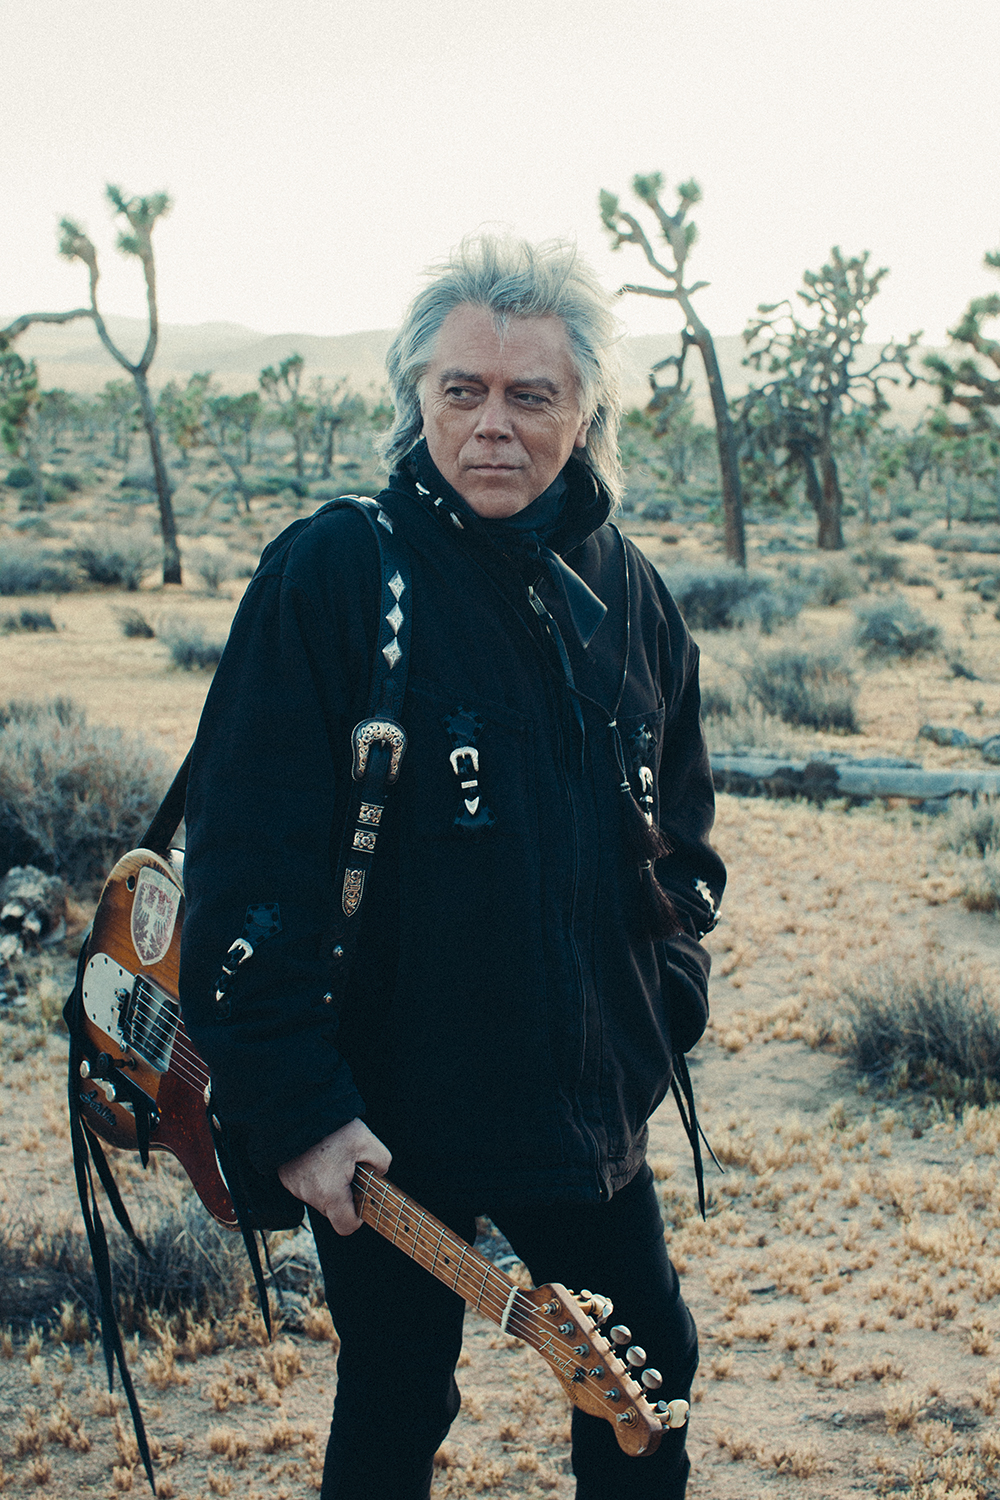 A promotional image of Marty Stuart, he is holding a guitar and is seemingly in a desert